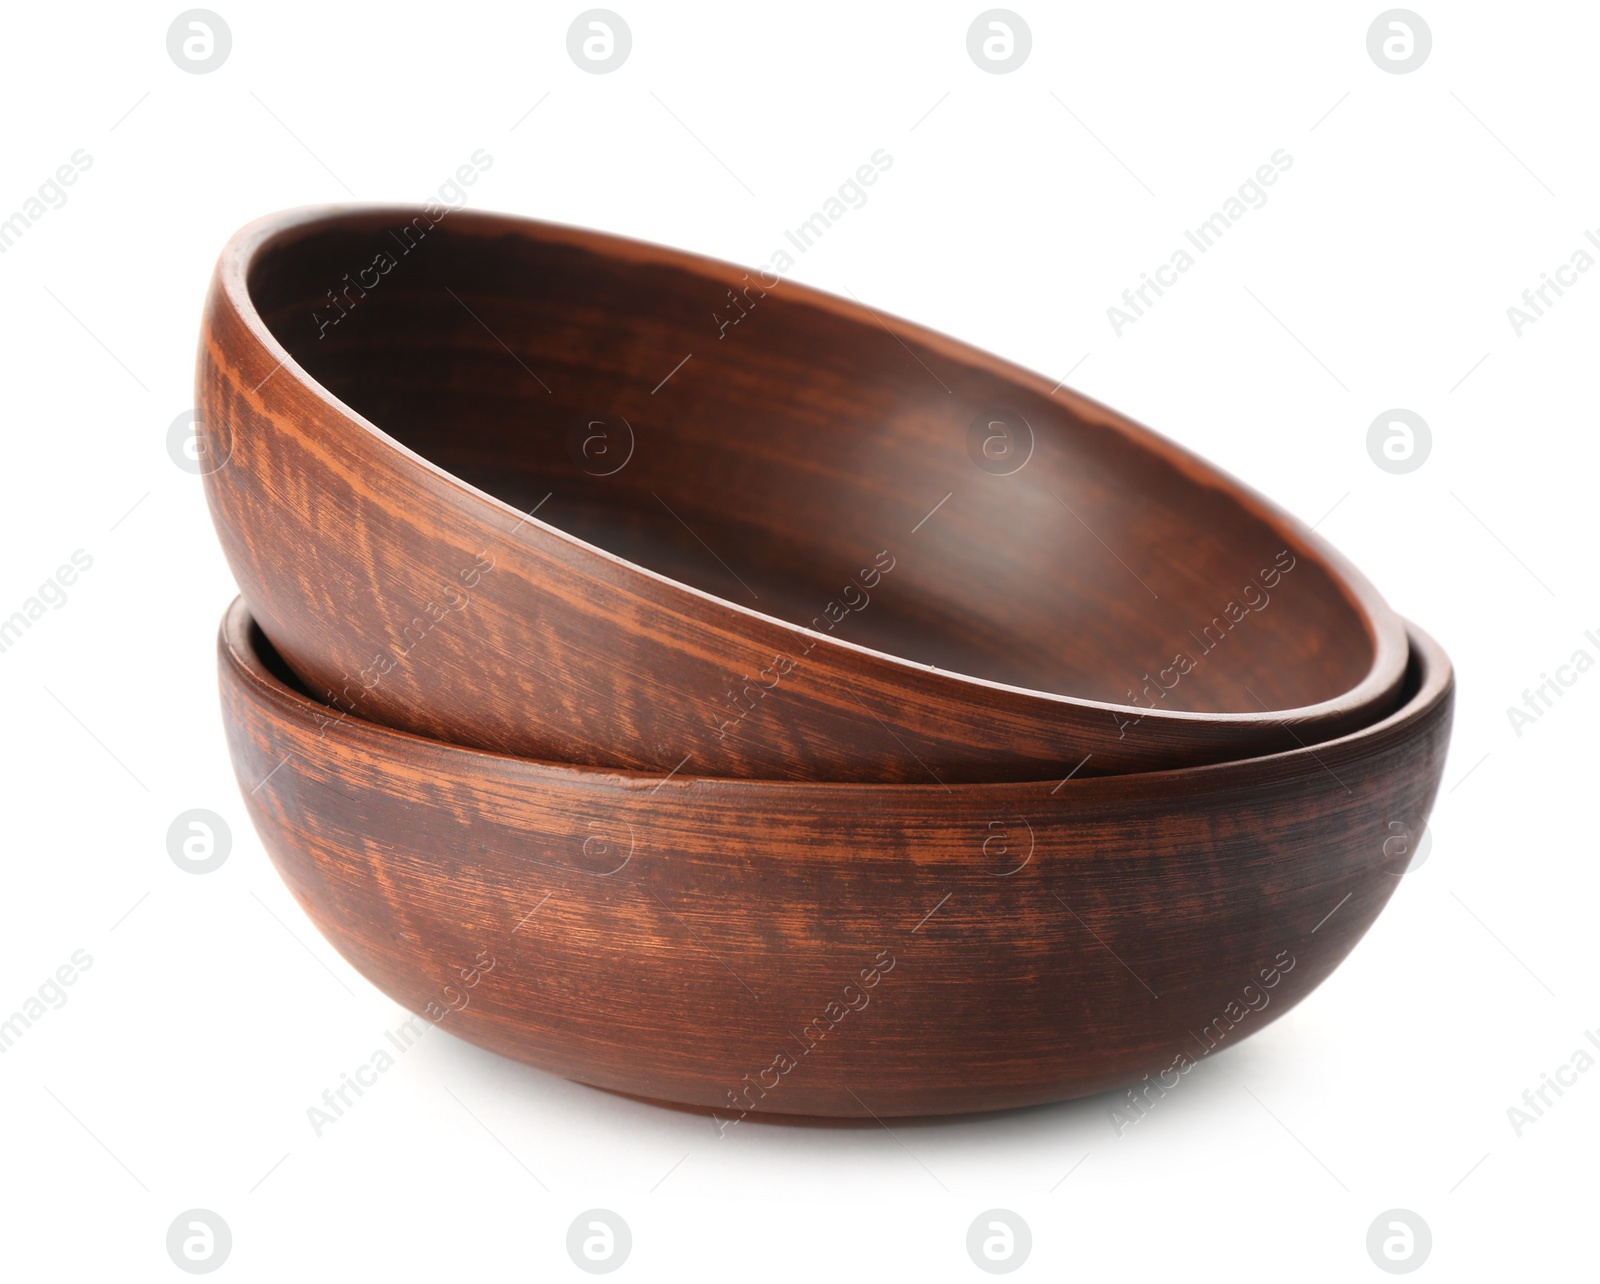 Photo of Stylish brown clay bowls on white background